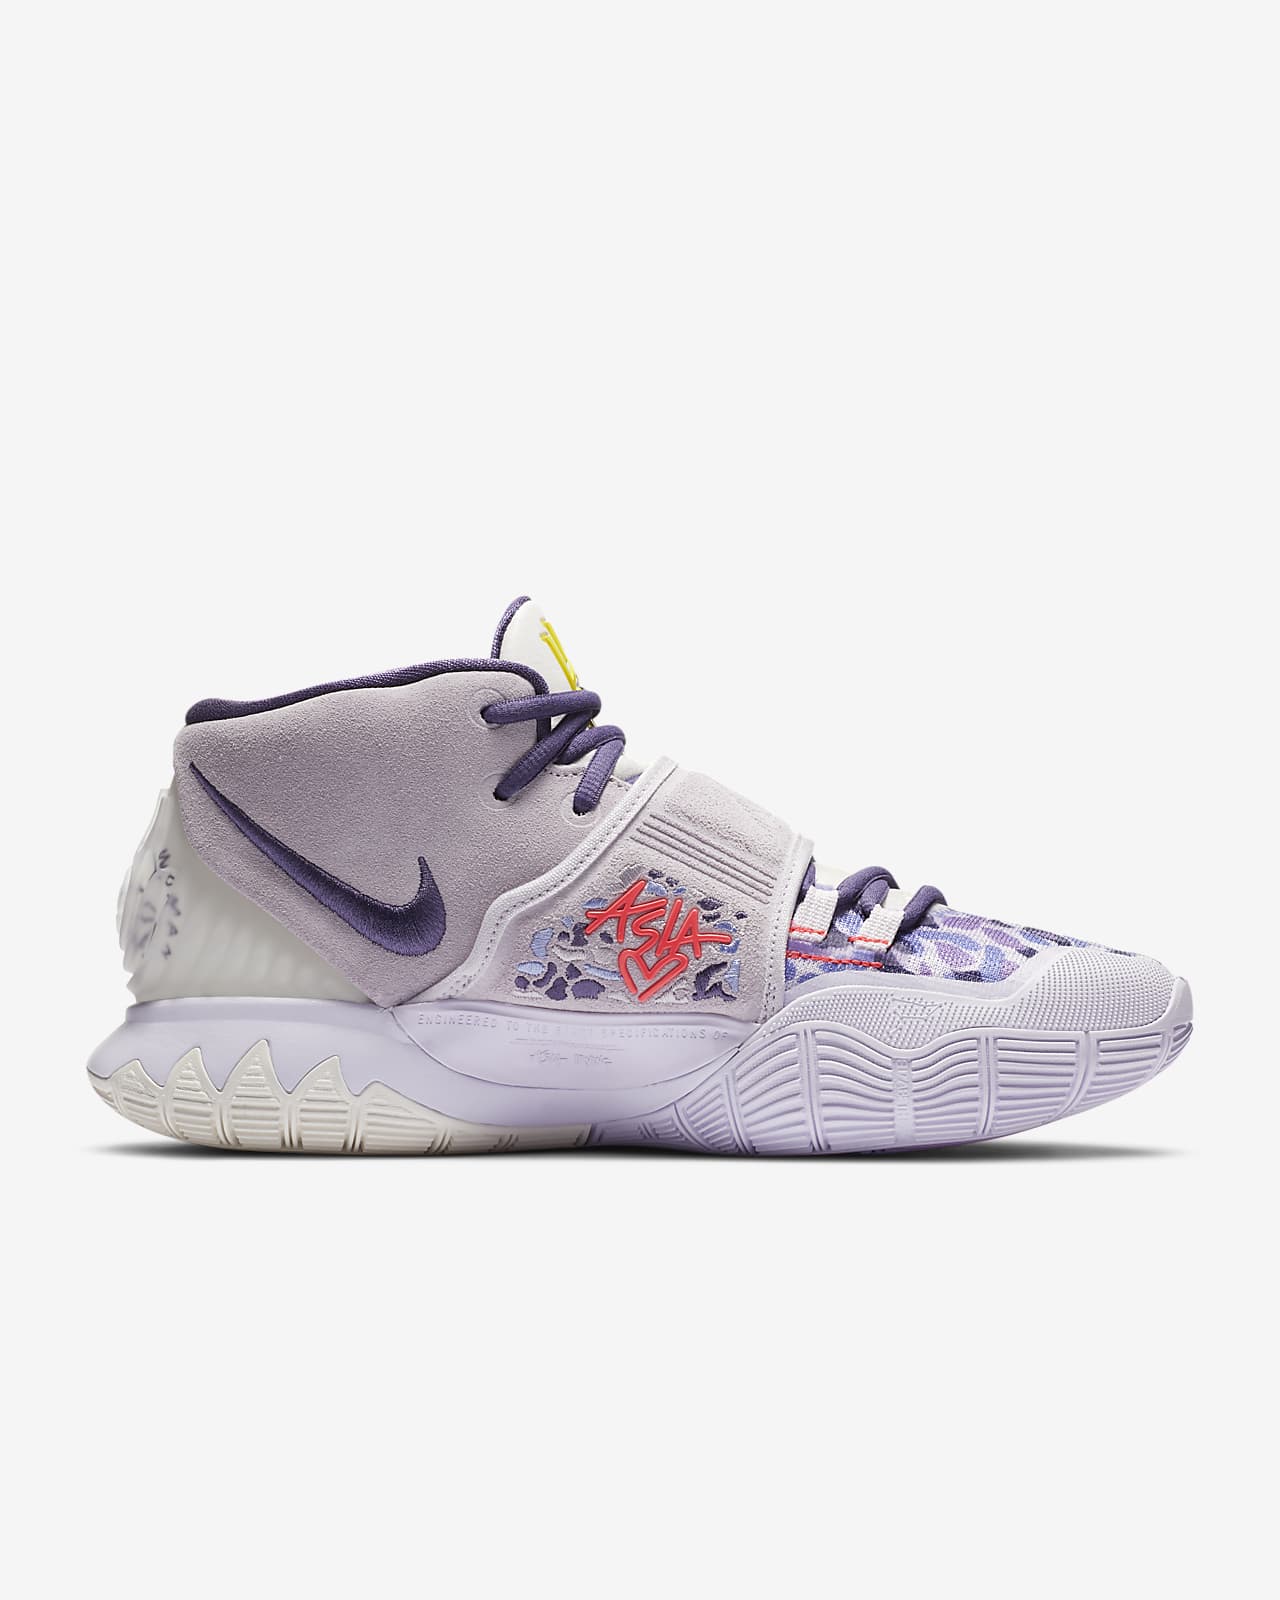 Nike Kyrie 6 N7 Products HYPEBEAST Trading Post